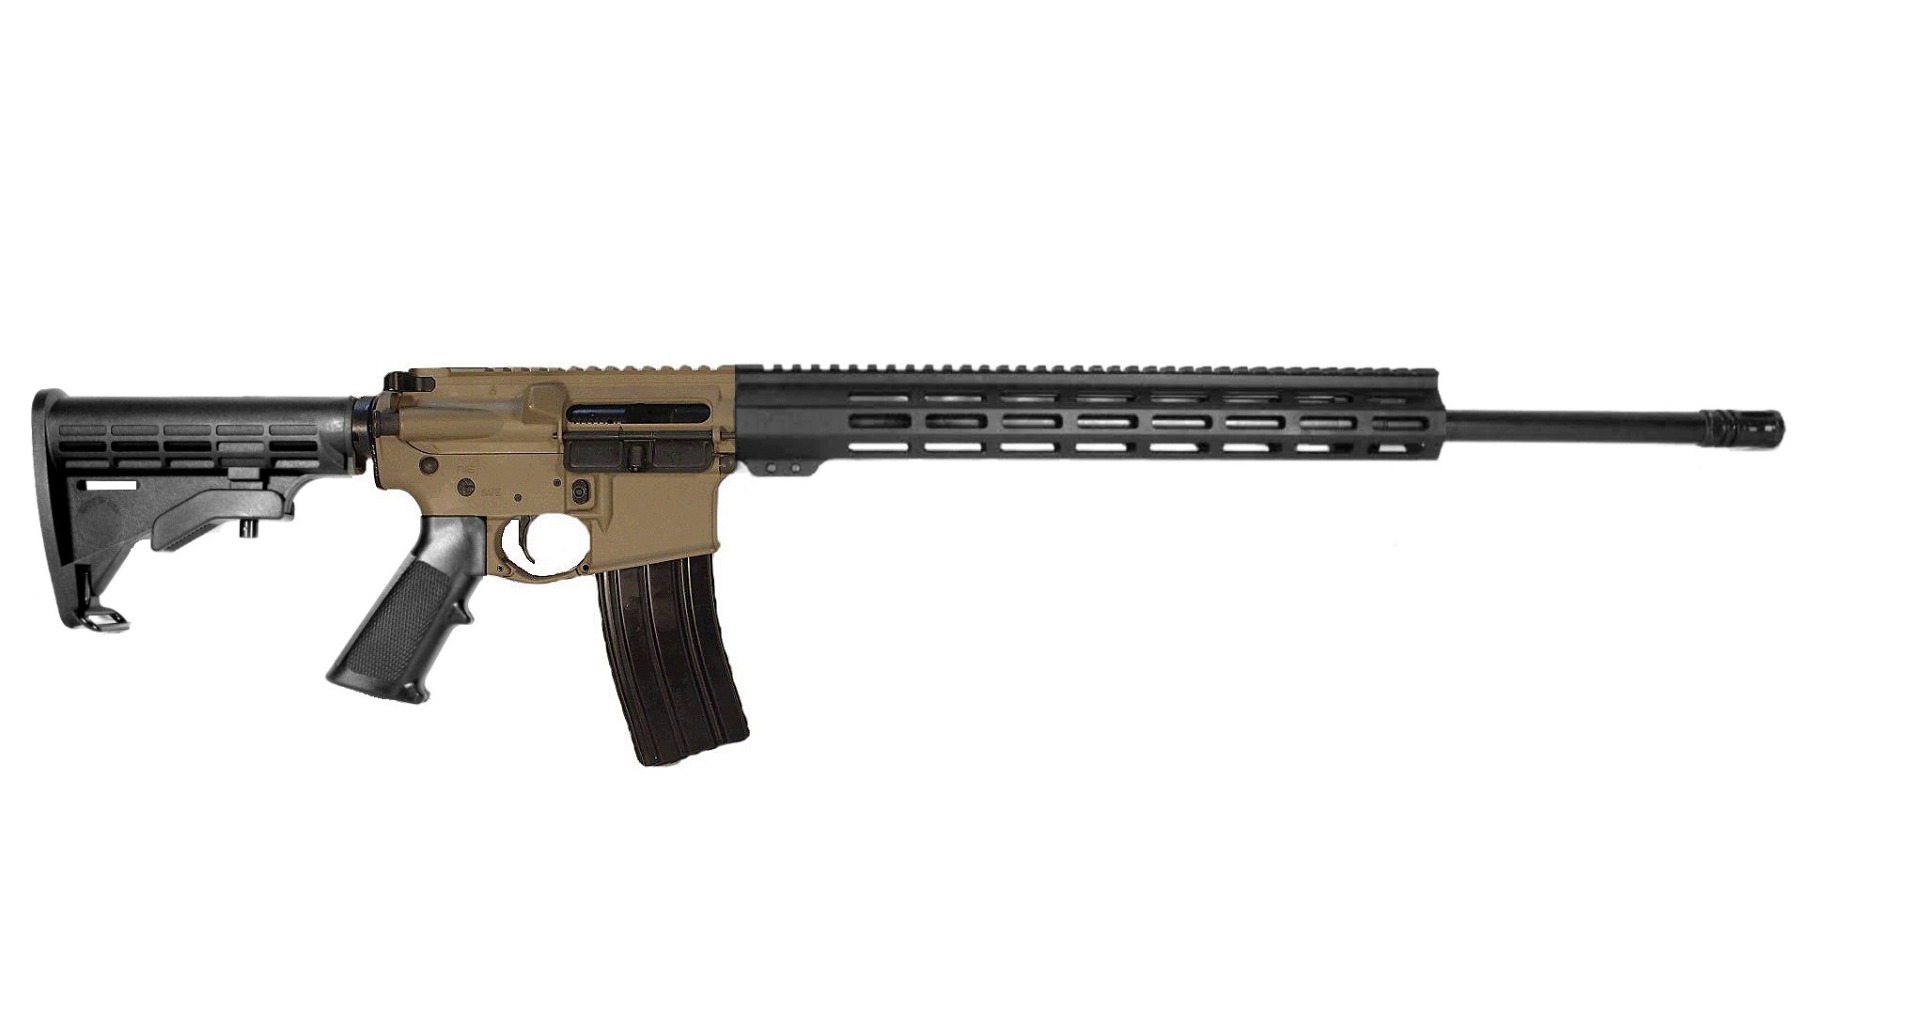 22 inch 5.56 NATO AR-15 Rifle | Milspec or Better | USA MADE